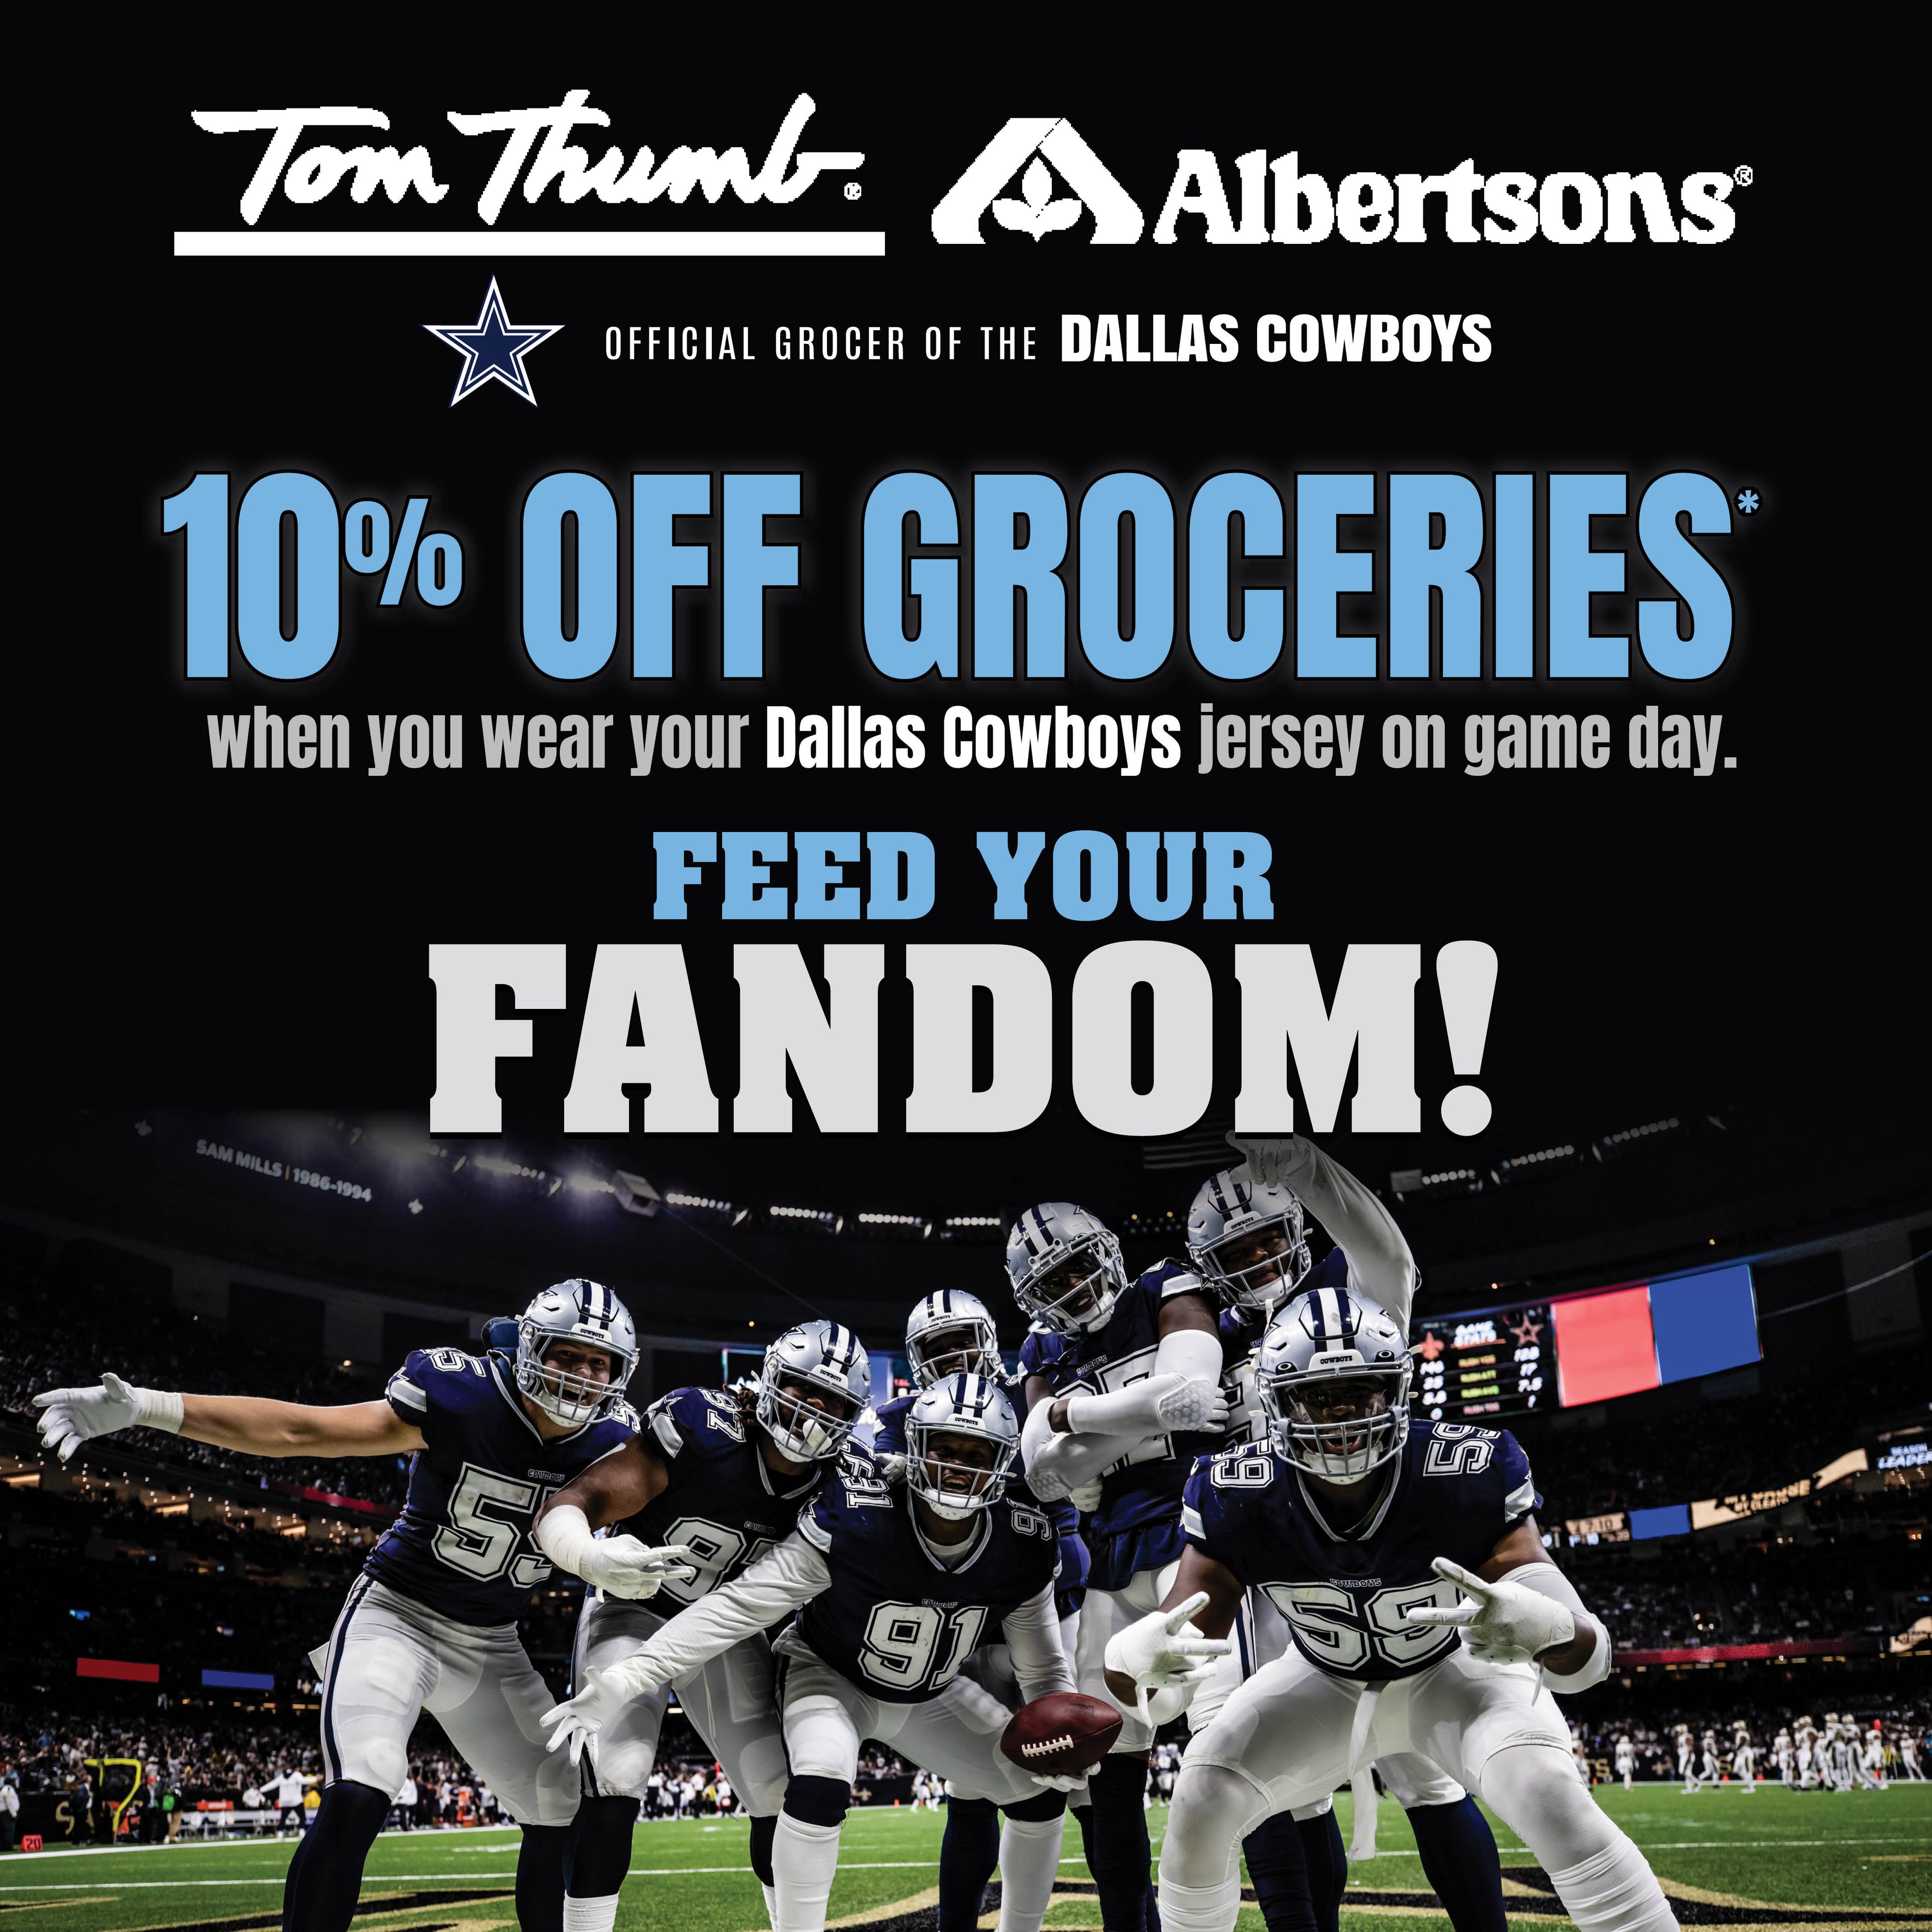 tom thumb cowboys game day discount